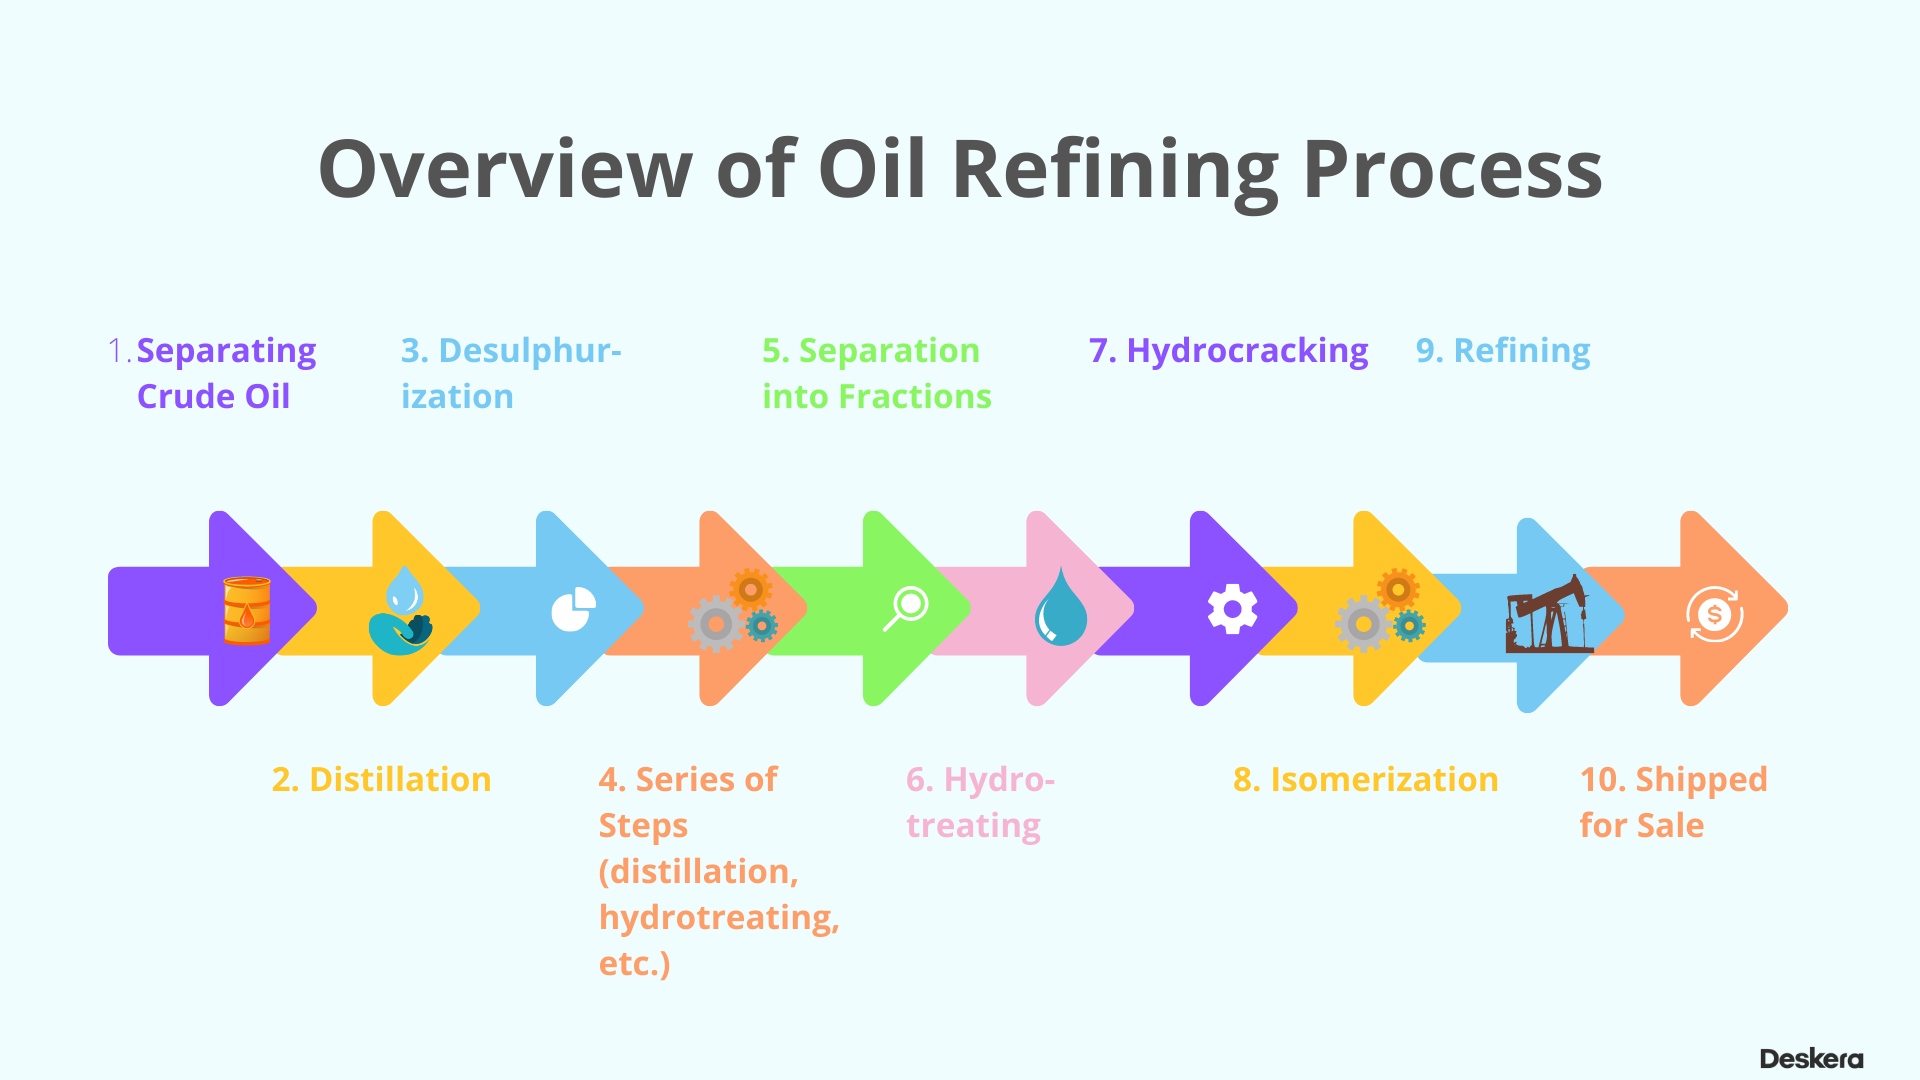 Overview of Oil Refining Process